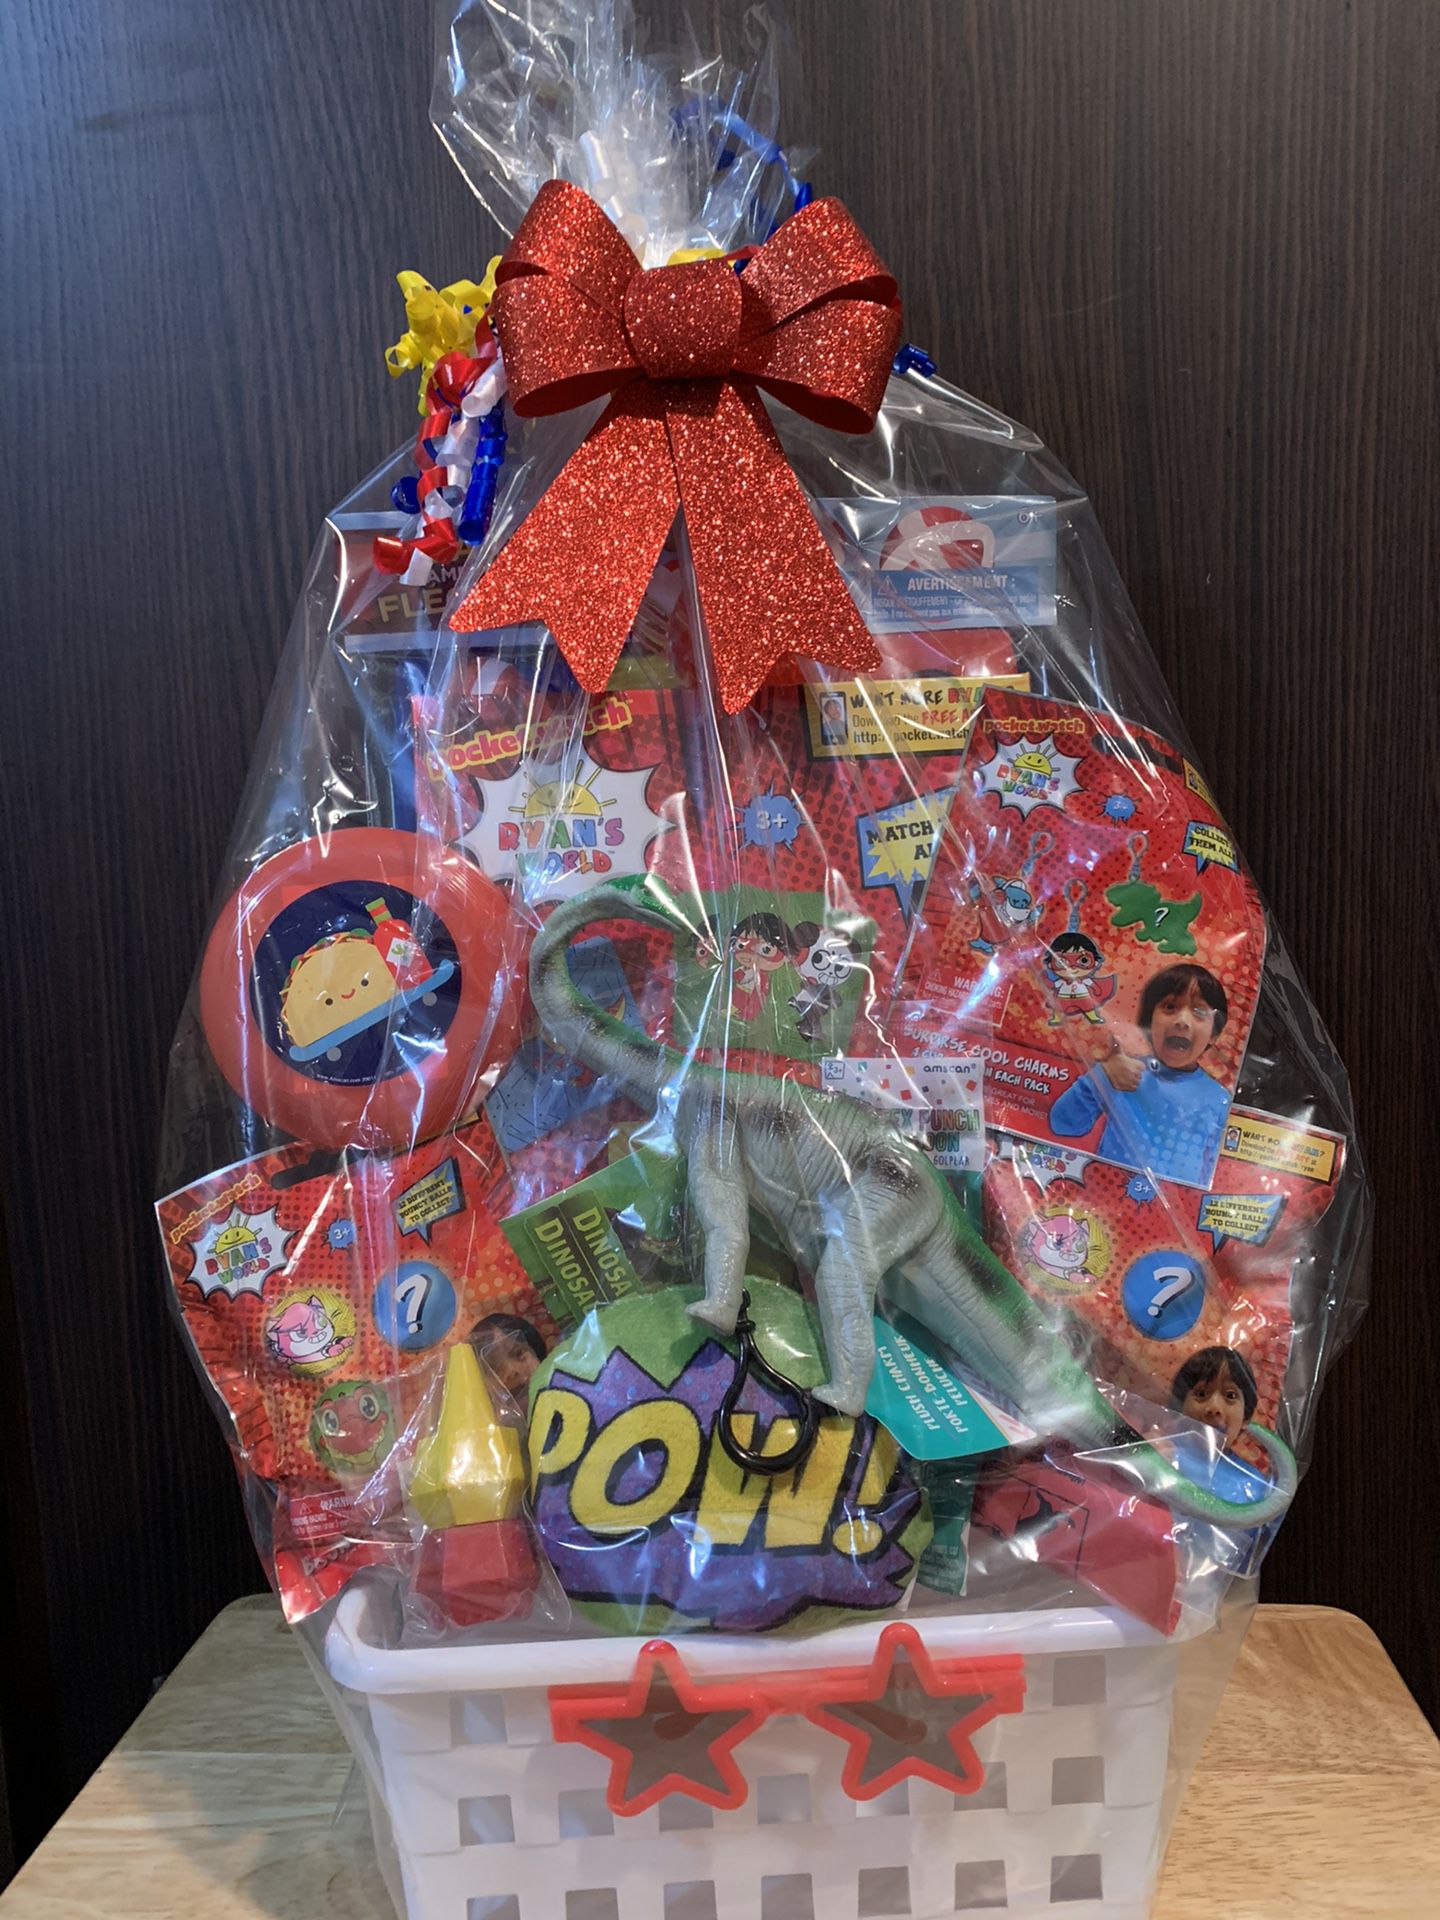 RYANS WORLD GIFT BASKET ONLY ONE OF A KIND